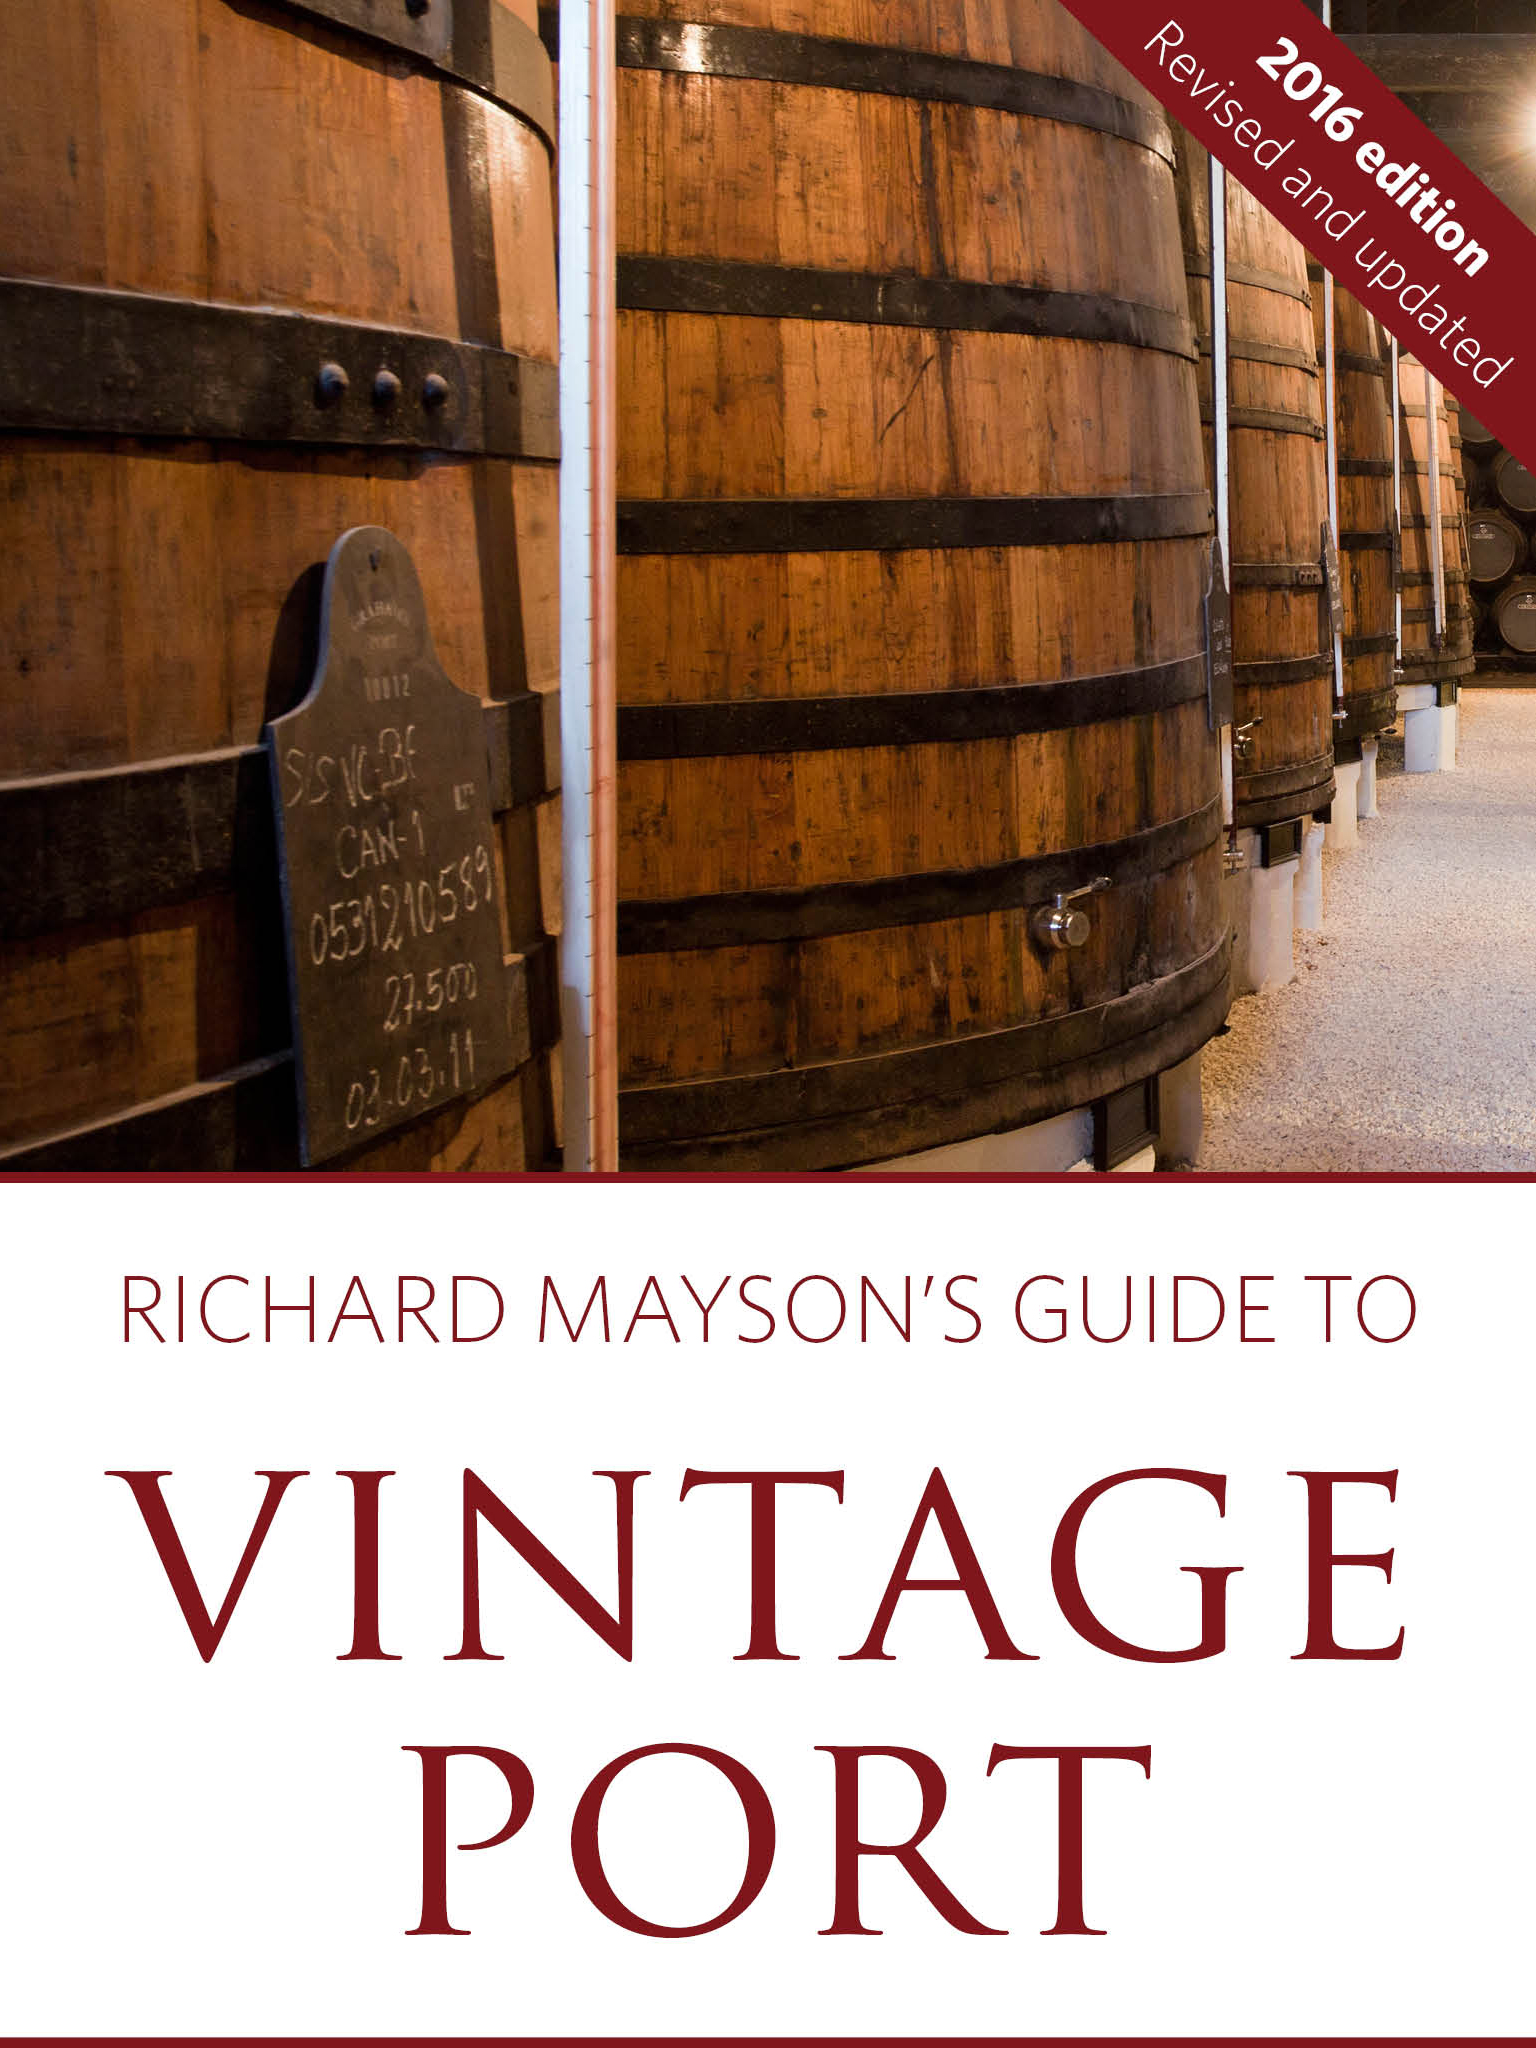 Richard Mayson’s guide to vintage port 2016